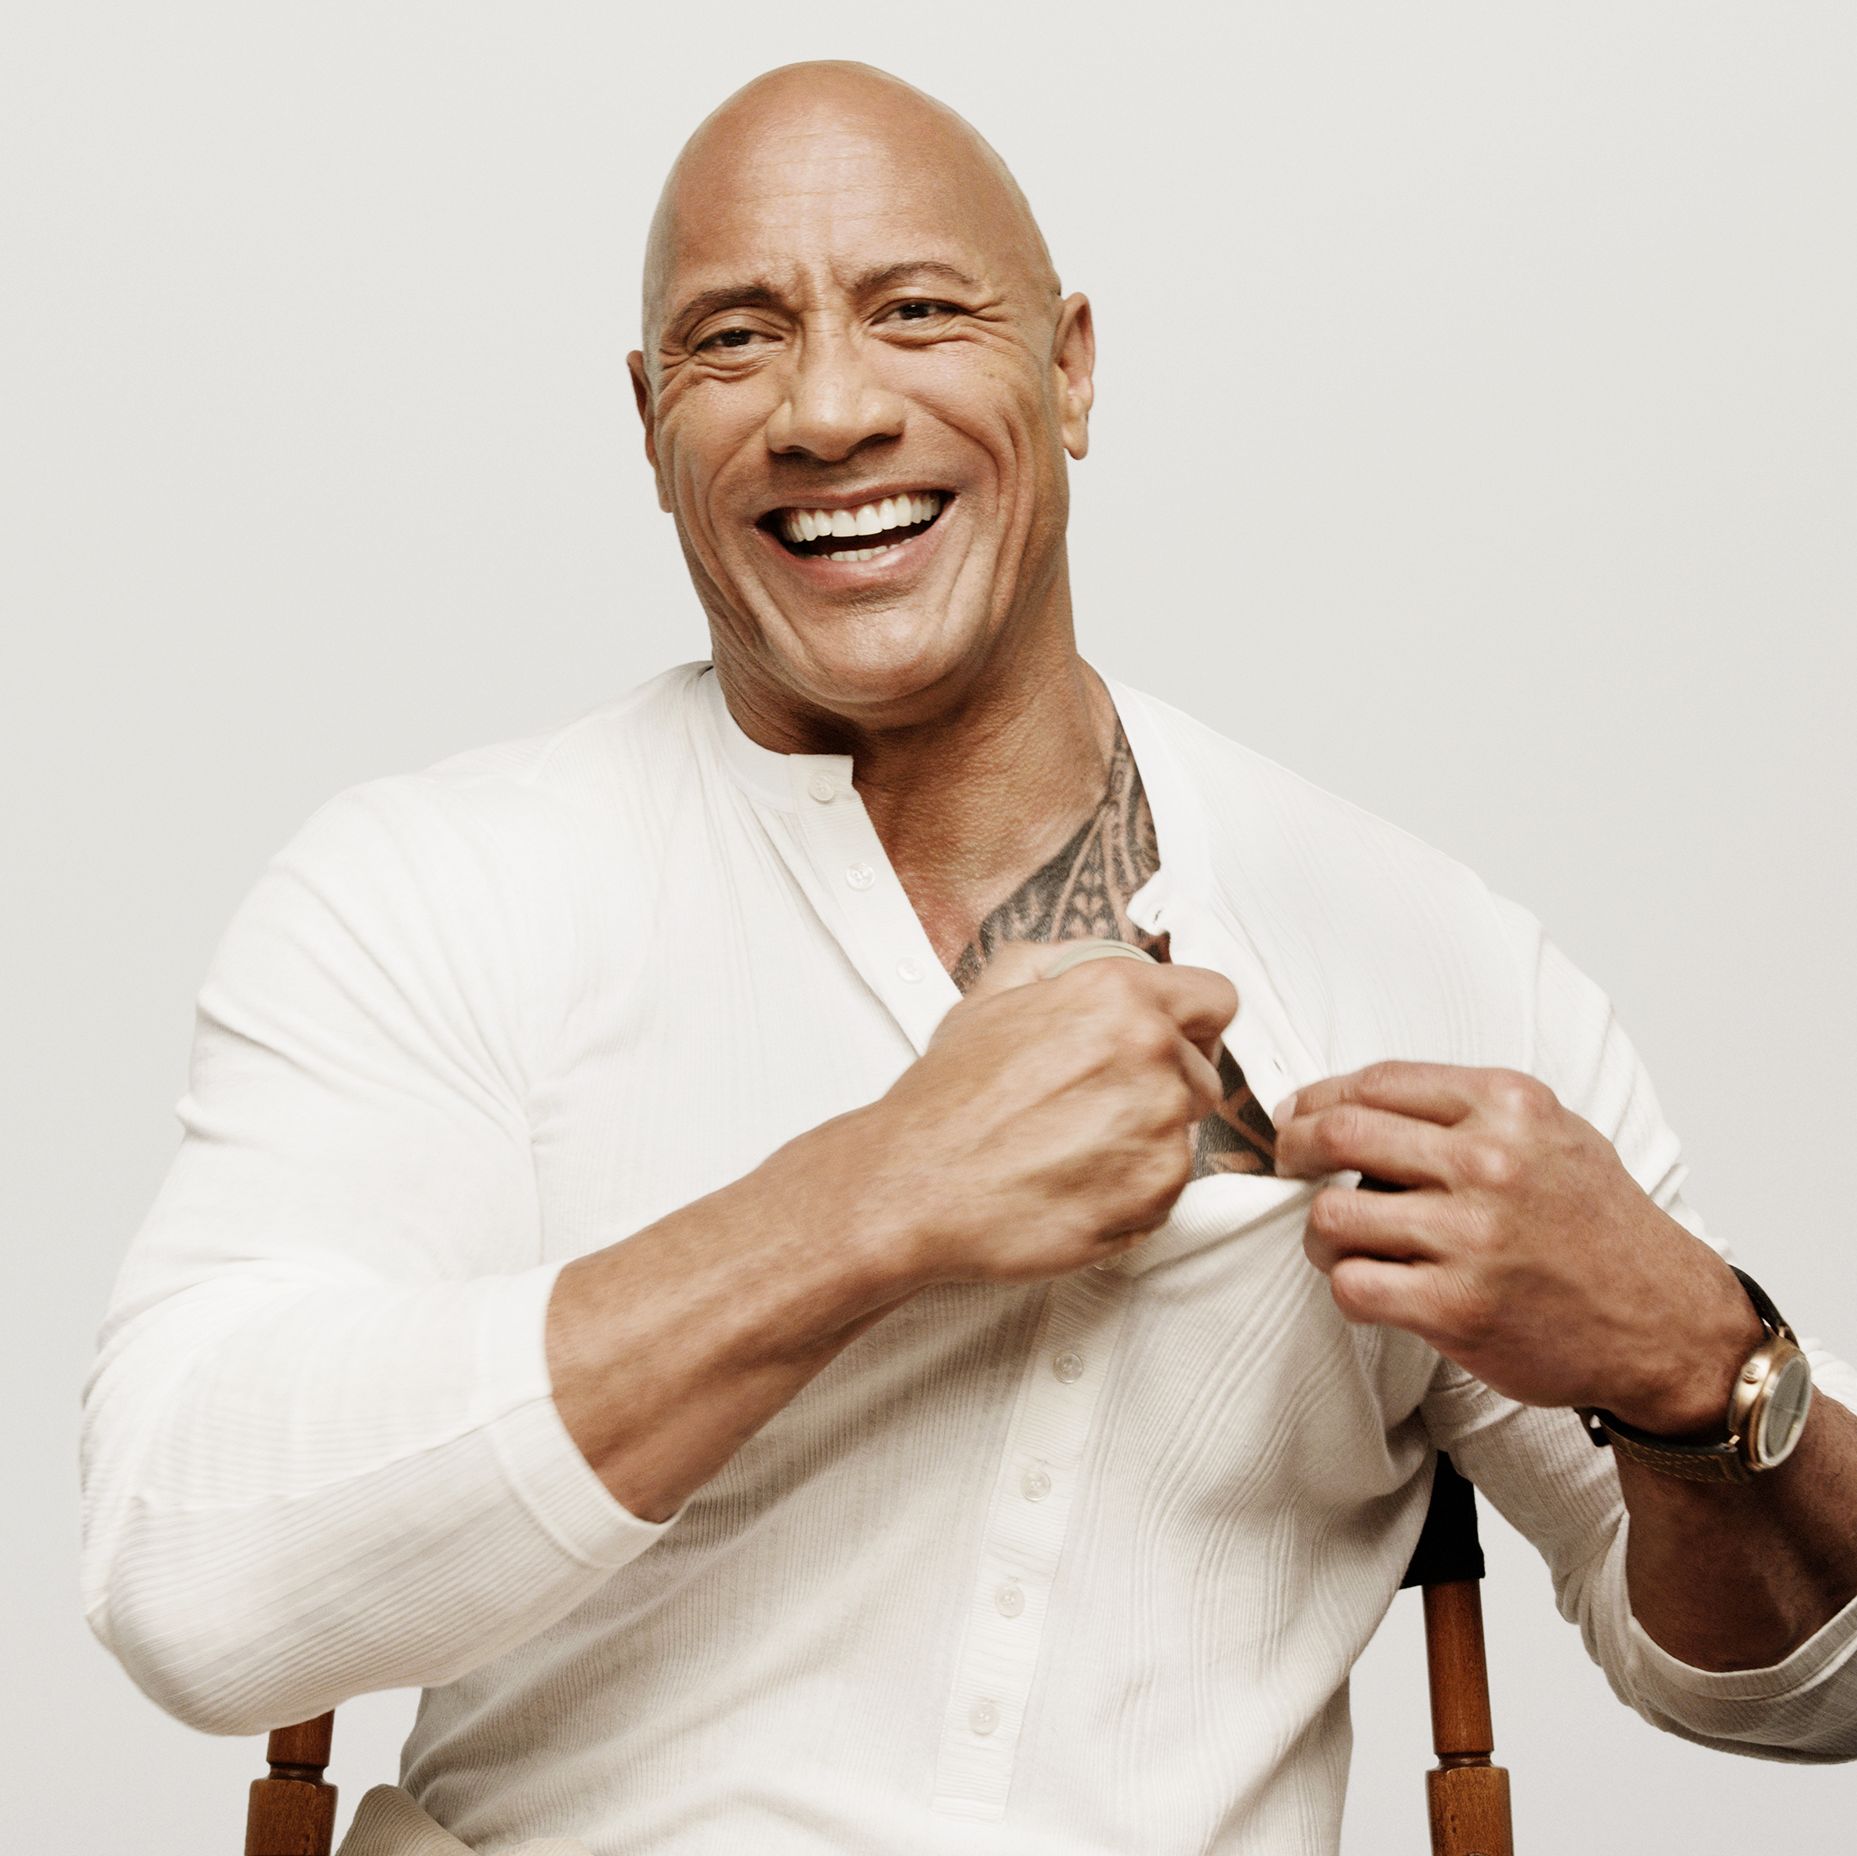 The Rock Wants His $10 Skincare Line to Be a Part of Your Life